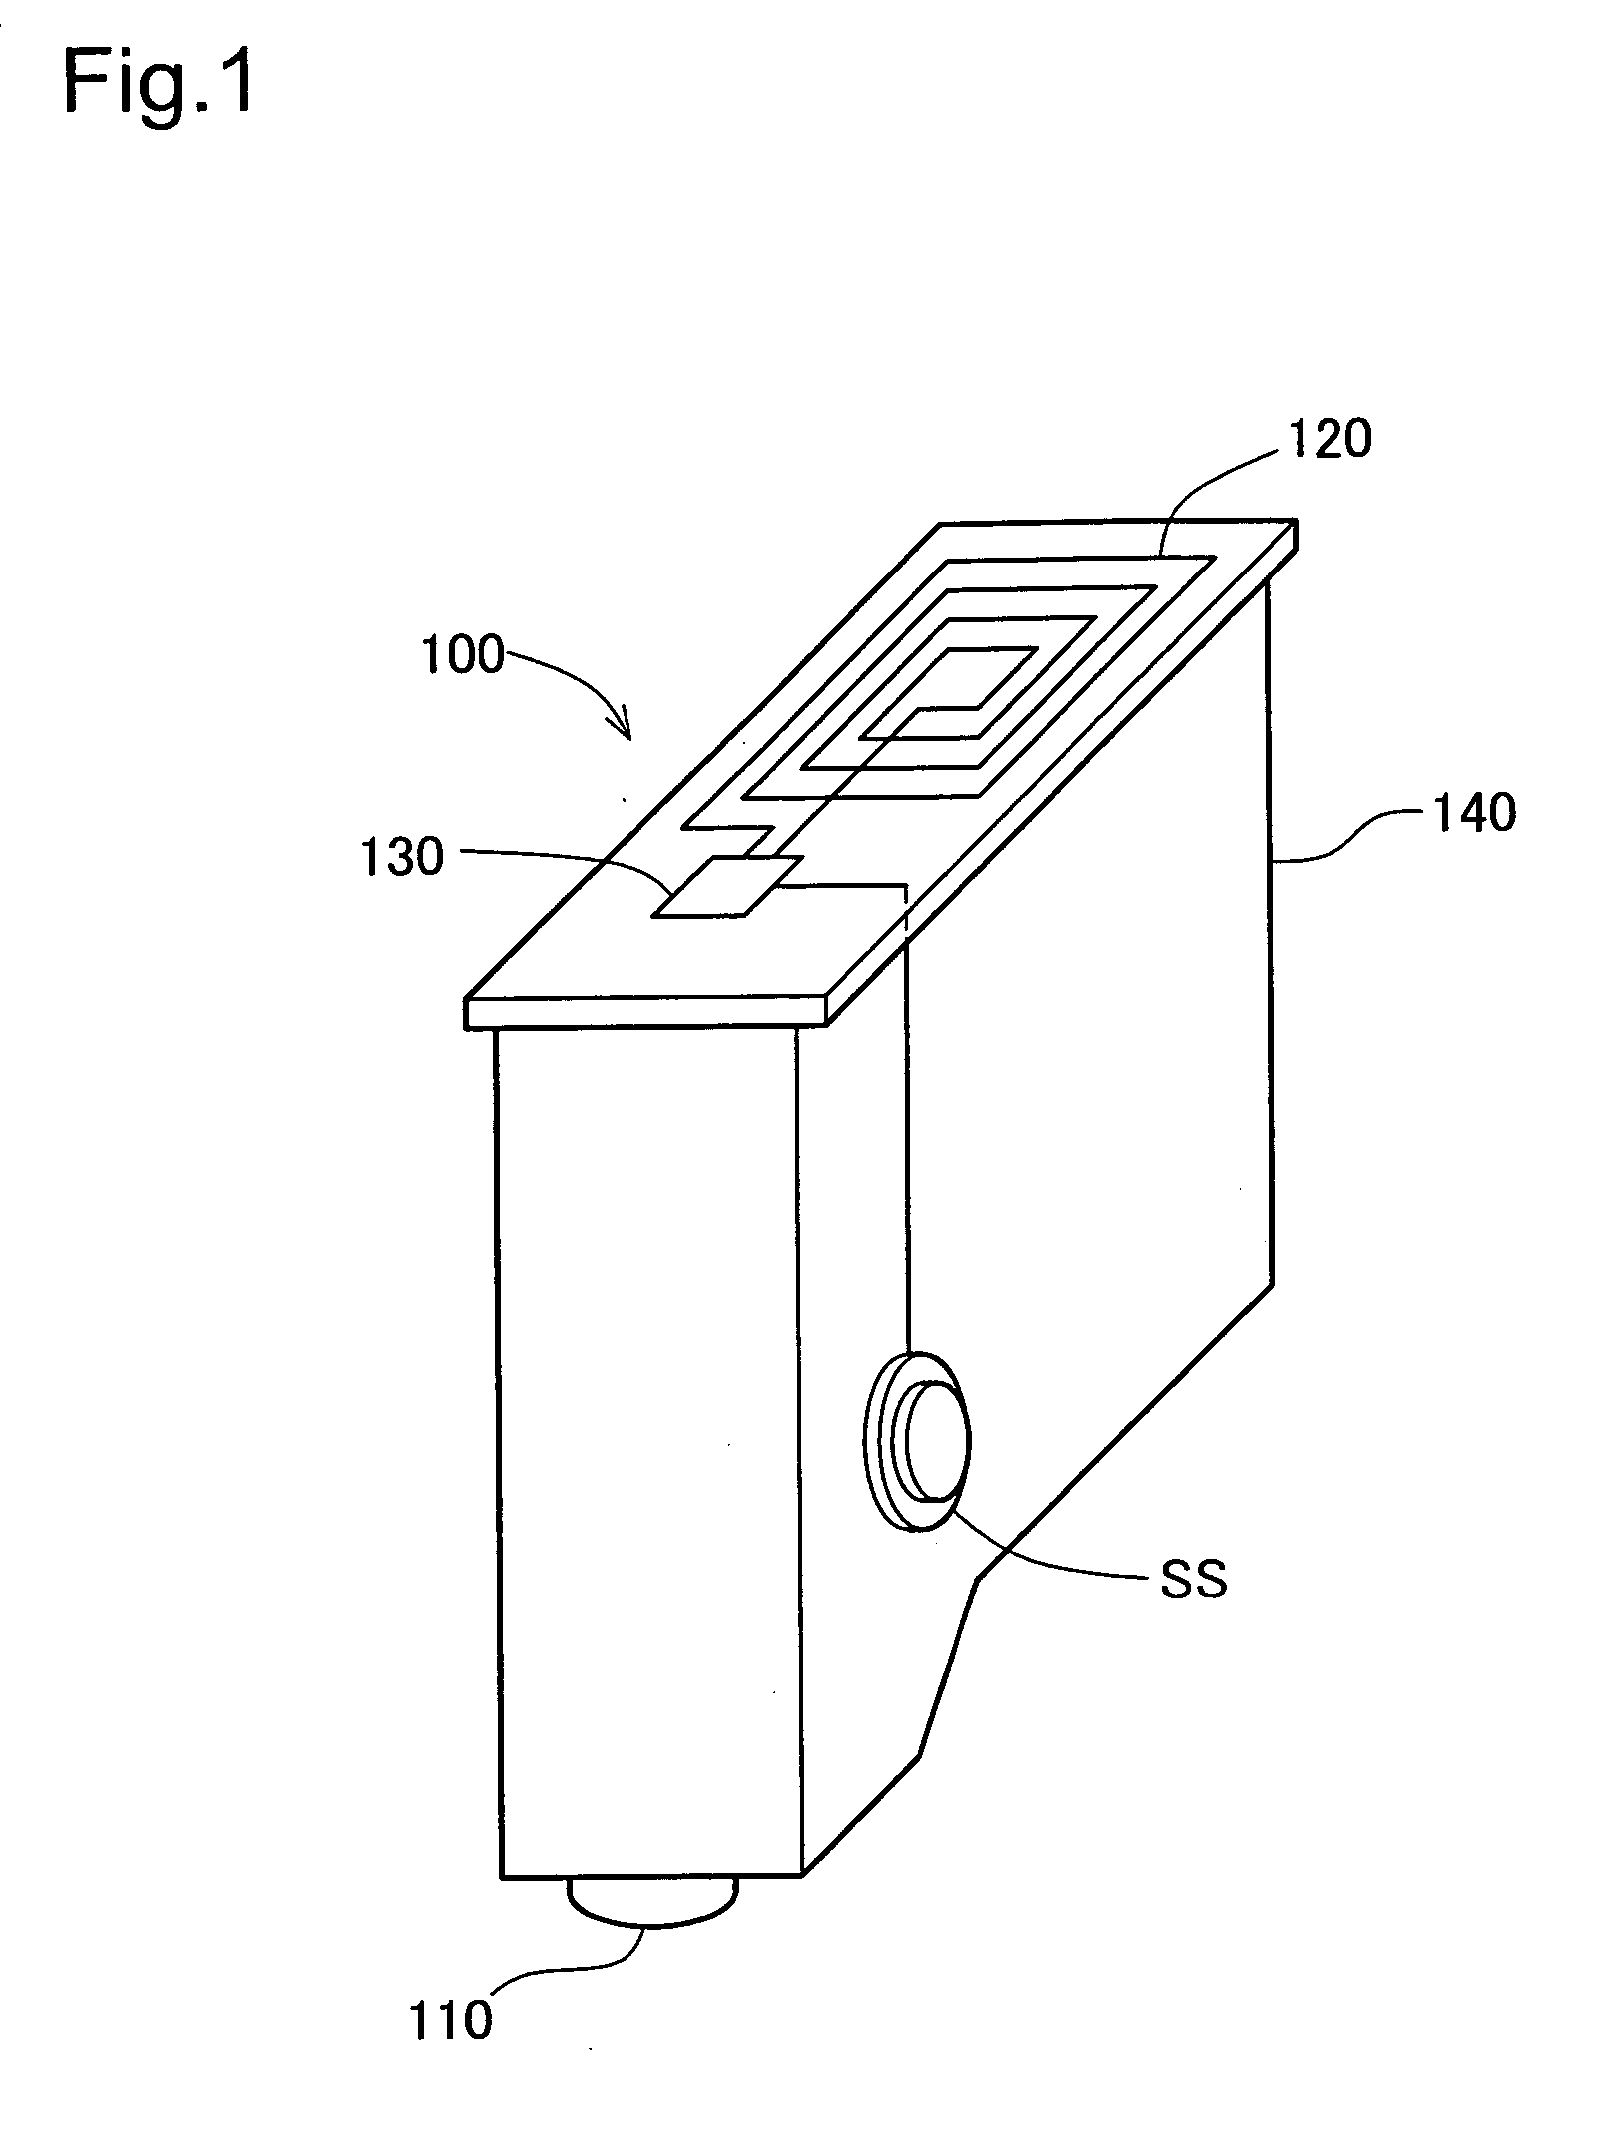 Expandable supplies container capable of measuring residual amount of expandable supplies